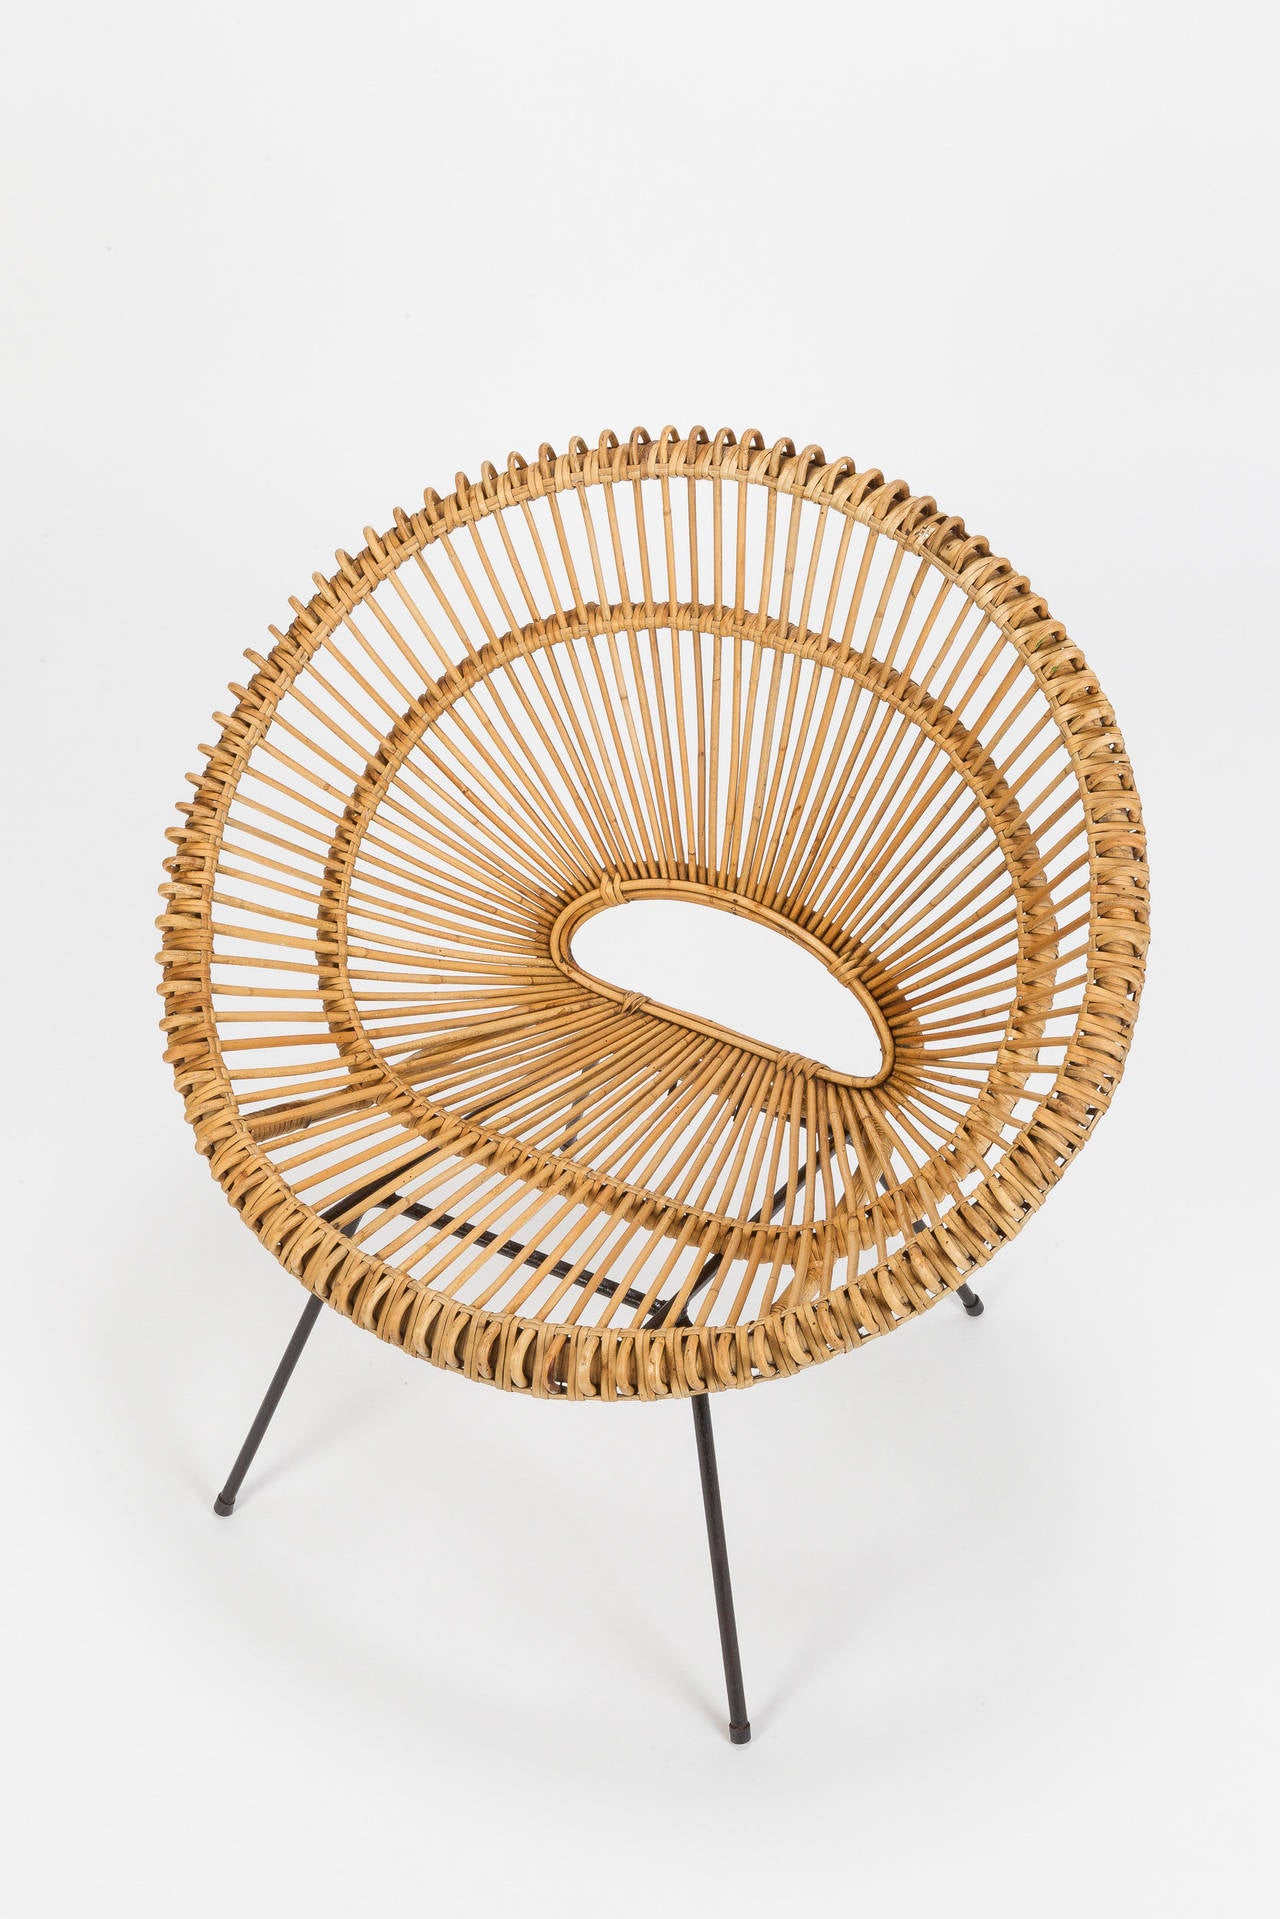 Mid-20th Century French Wicker Chair Attributed to Janine Abraham & Dirk Jan Rol, 1950s